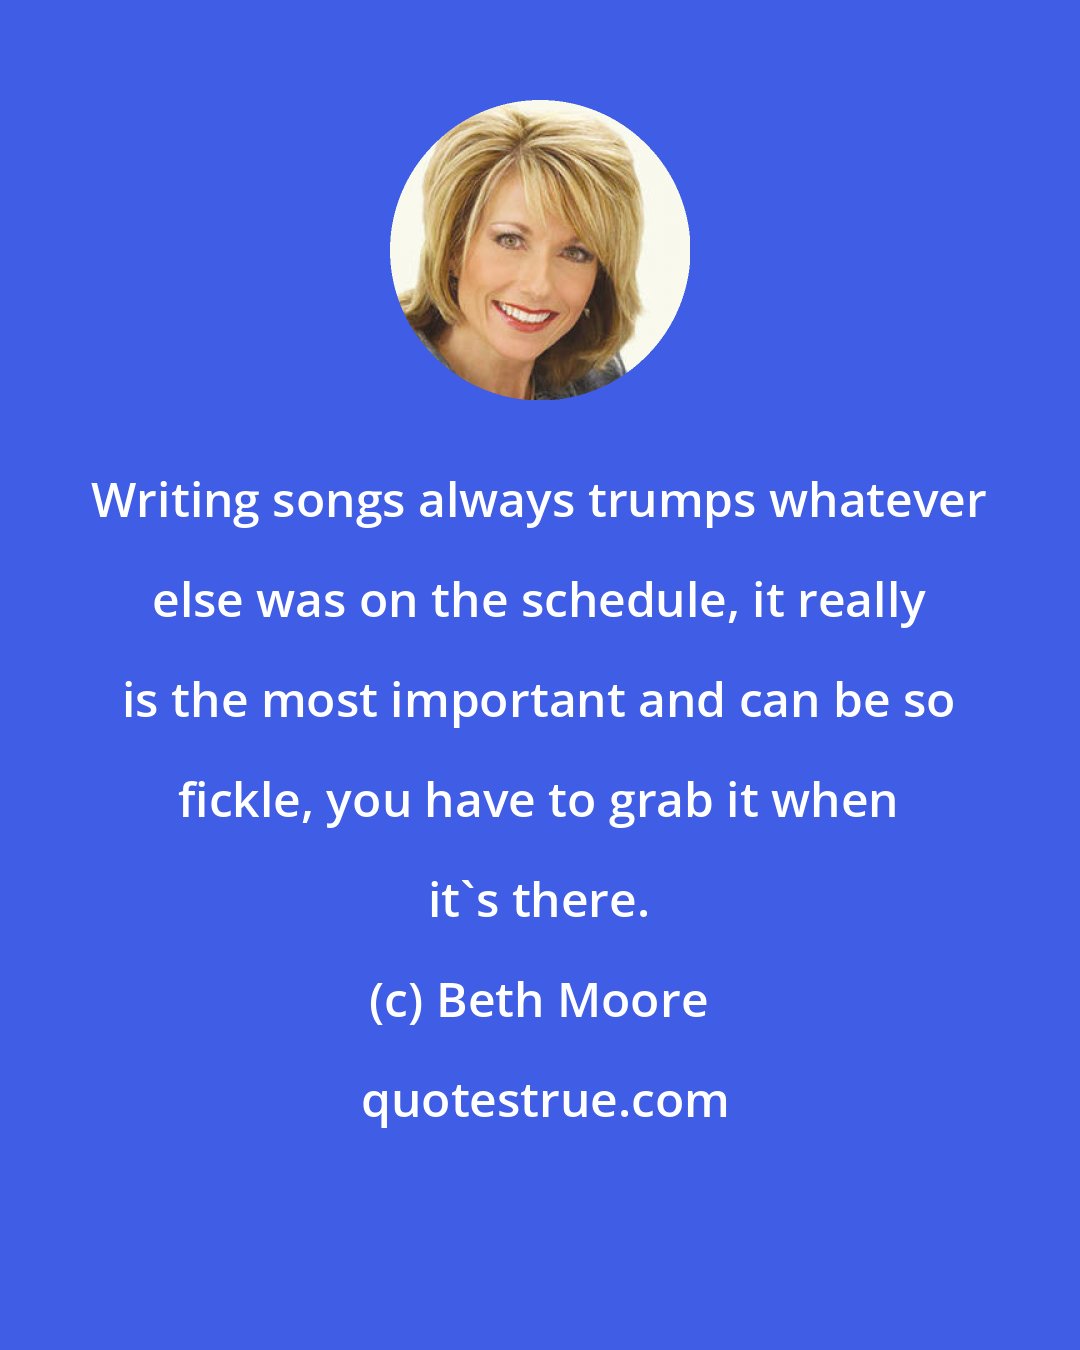 Beth Moore: Writing songs always trumps whatever else was on the schedule, it really is the most important and can be so fickle, you have to grab it when it's there.